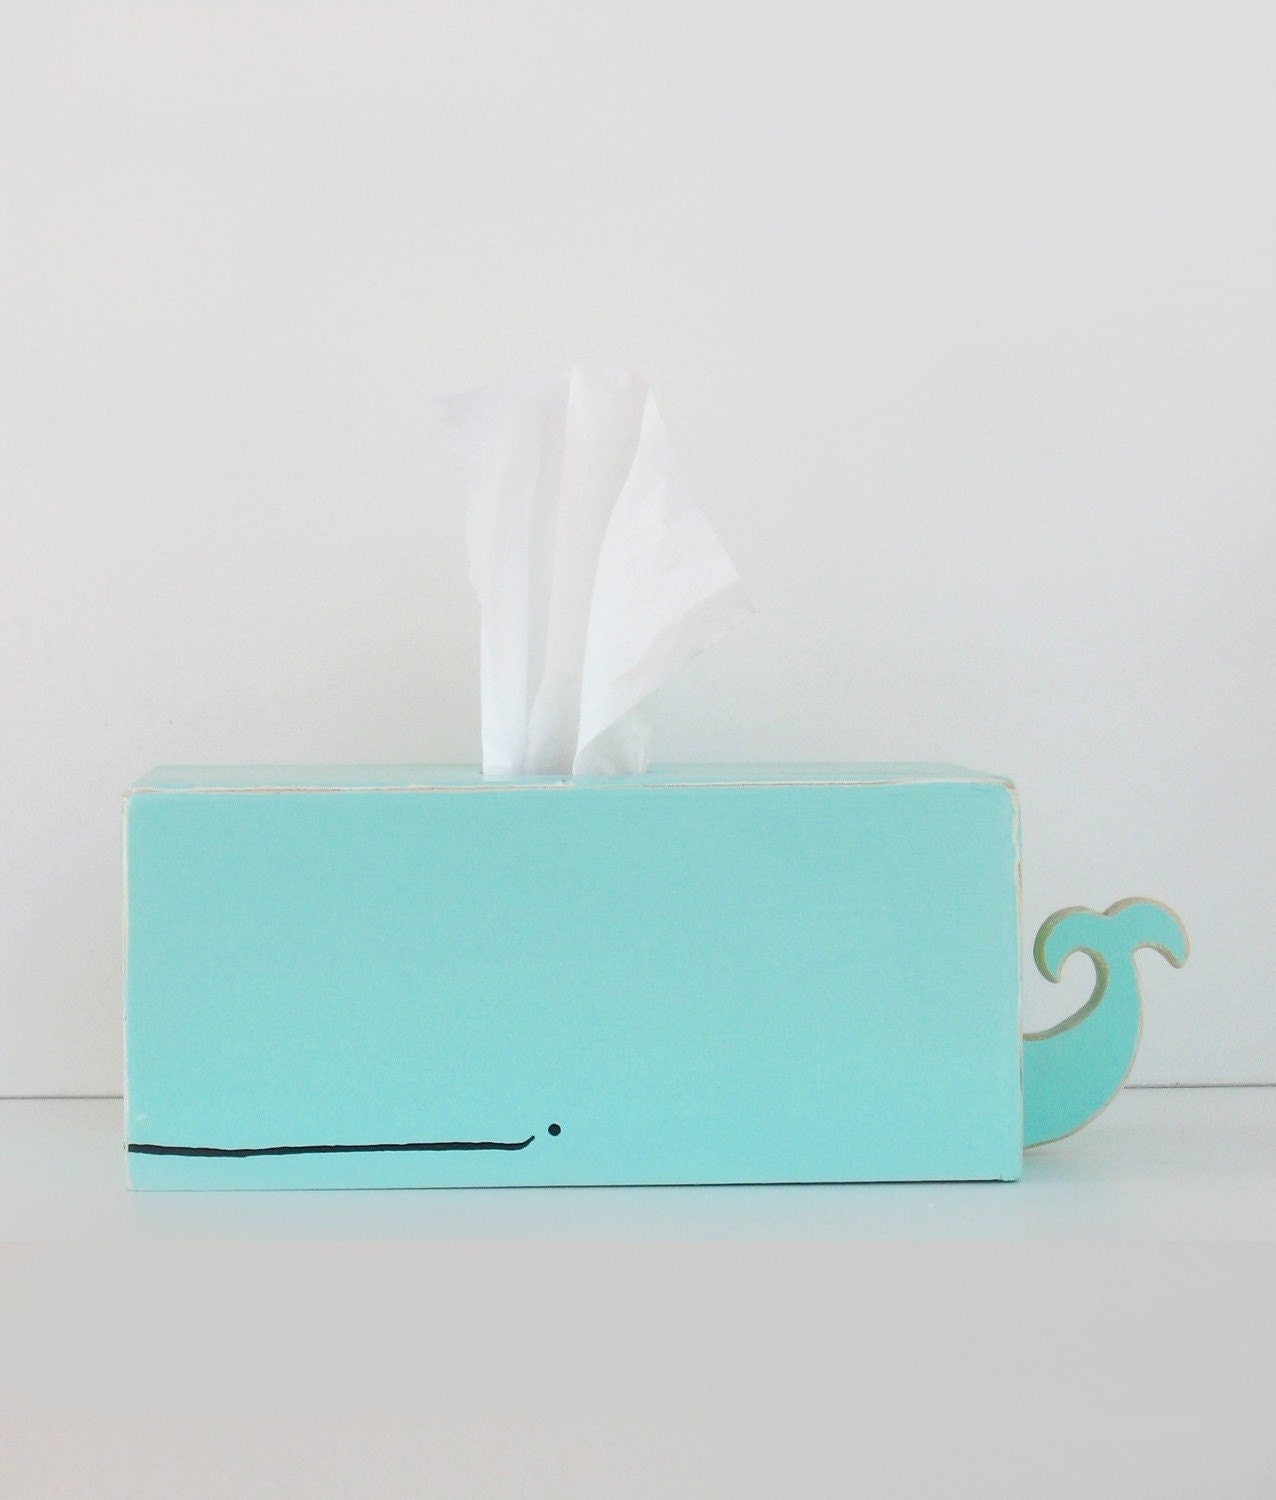 Whale Tissue Holder - Light Blue - July 4 Special